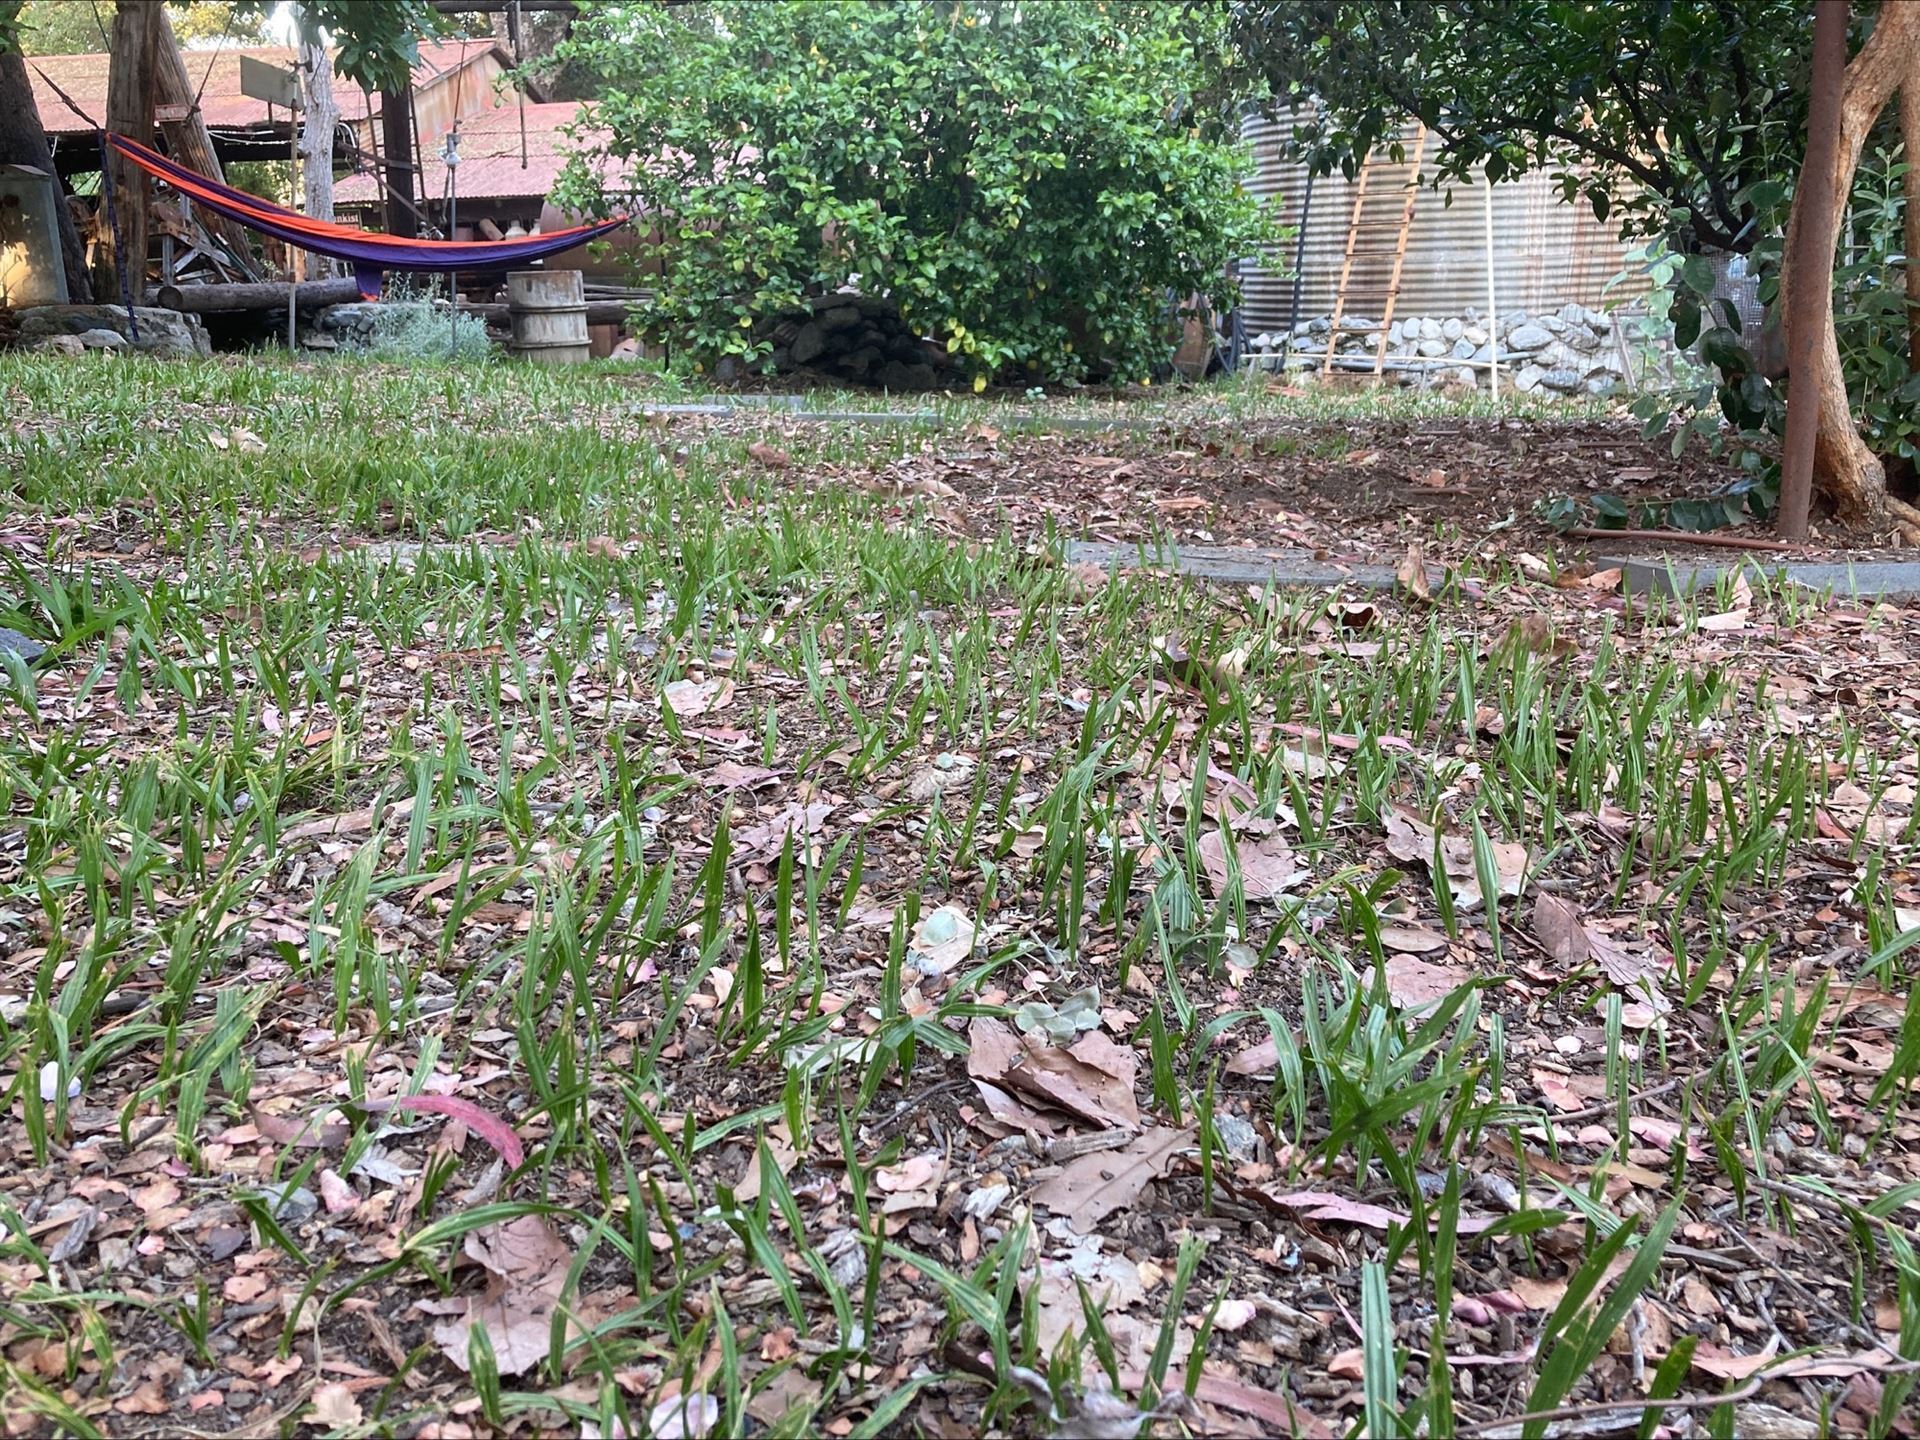 Color photograph of castle grounds. Close up of foreground with countless 3 inch sprouts of palm tree coming up out of the the brown compost and soil. In the middle ground right is the trunk and underbrush of a guava tree. Background of a bue and red hammock on the left, a lemon tree center with some yellow lemons on it. To the righ, behind the guava tree is a metal rusted ladder leaning against a corrugated tin water tank. THe red roofs of the packing buildings are visible to the left beyond the windmil and water tower foundations.